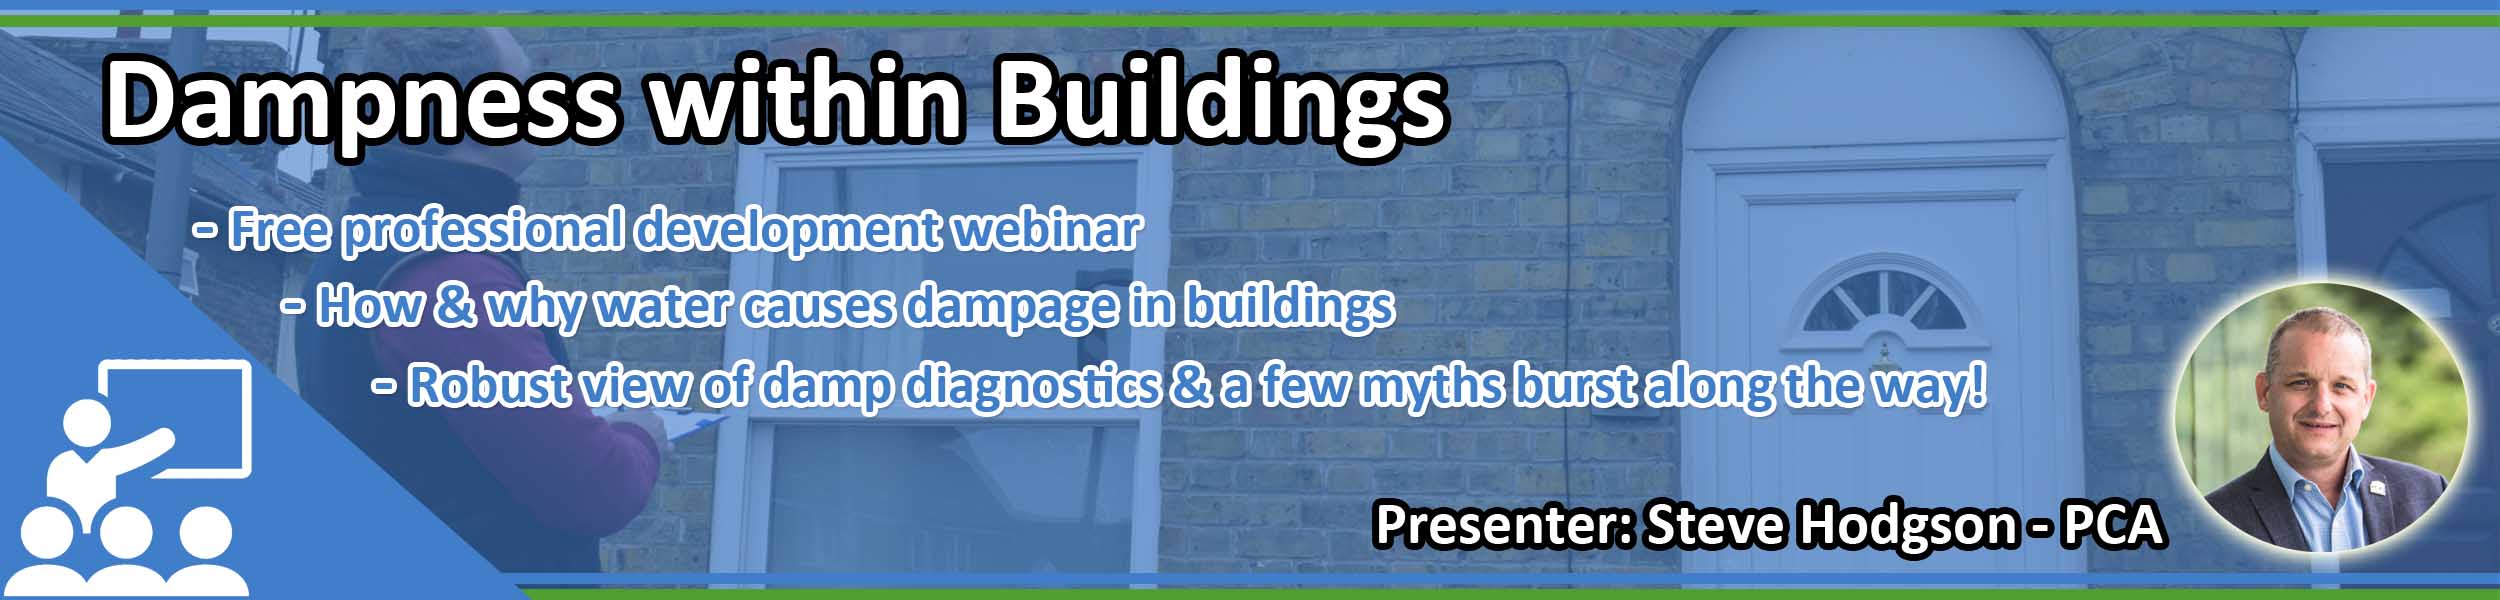 Dampness-within-Buildings-post-webinar